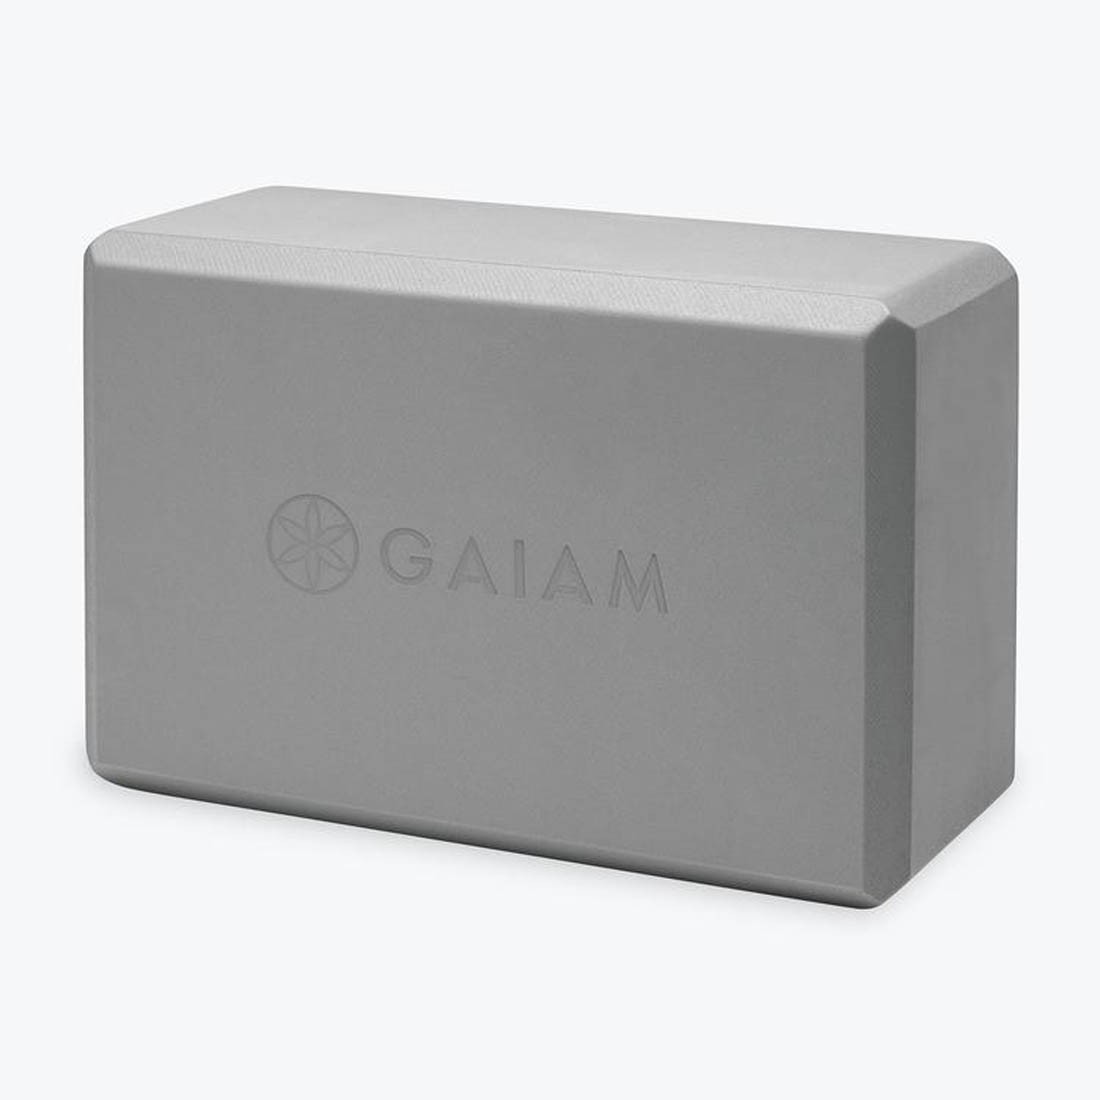 Order GAIAM Grey Yoga Block - GAIAM, delivered to your home